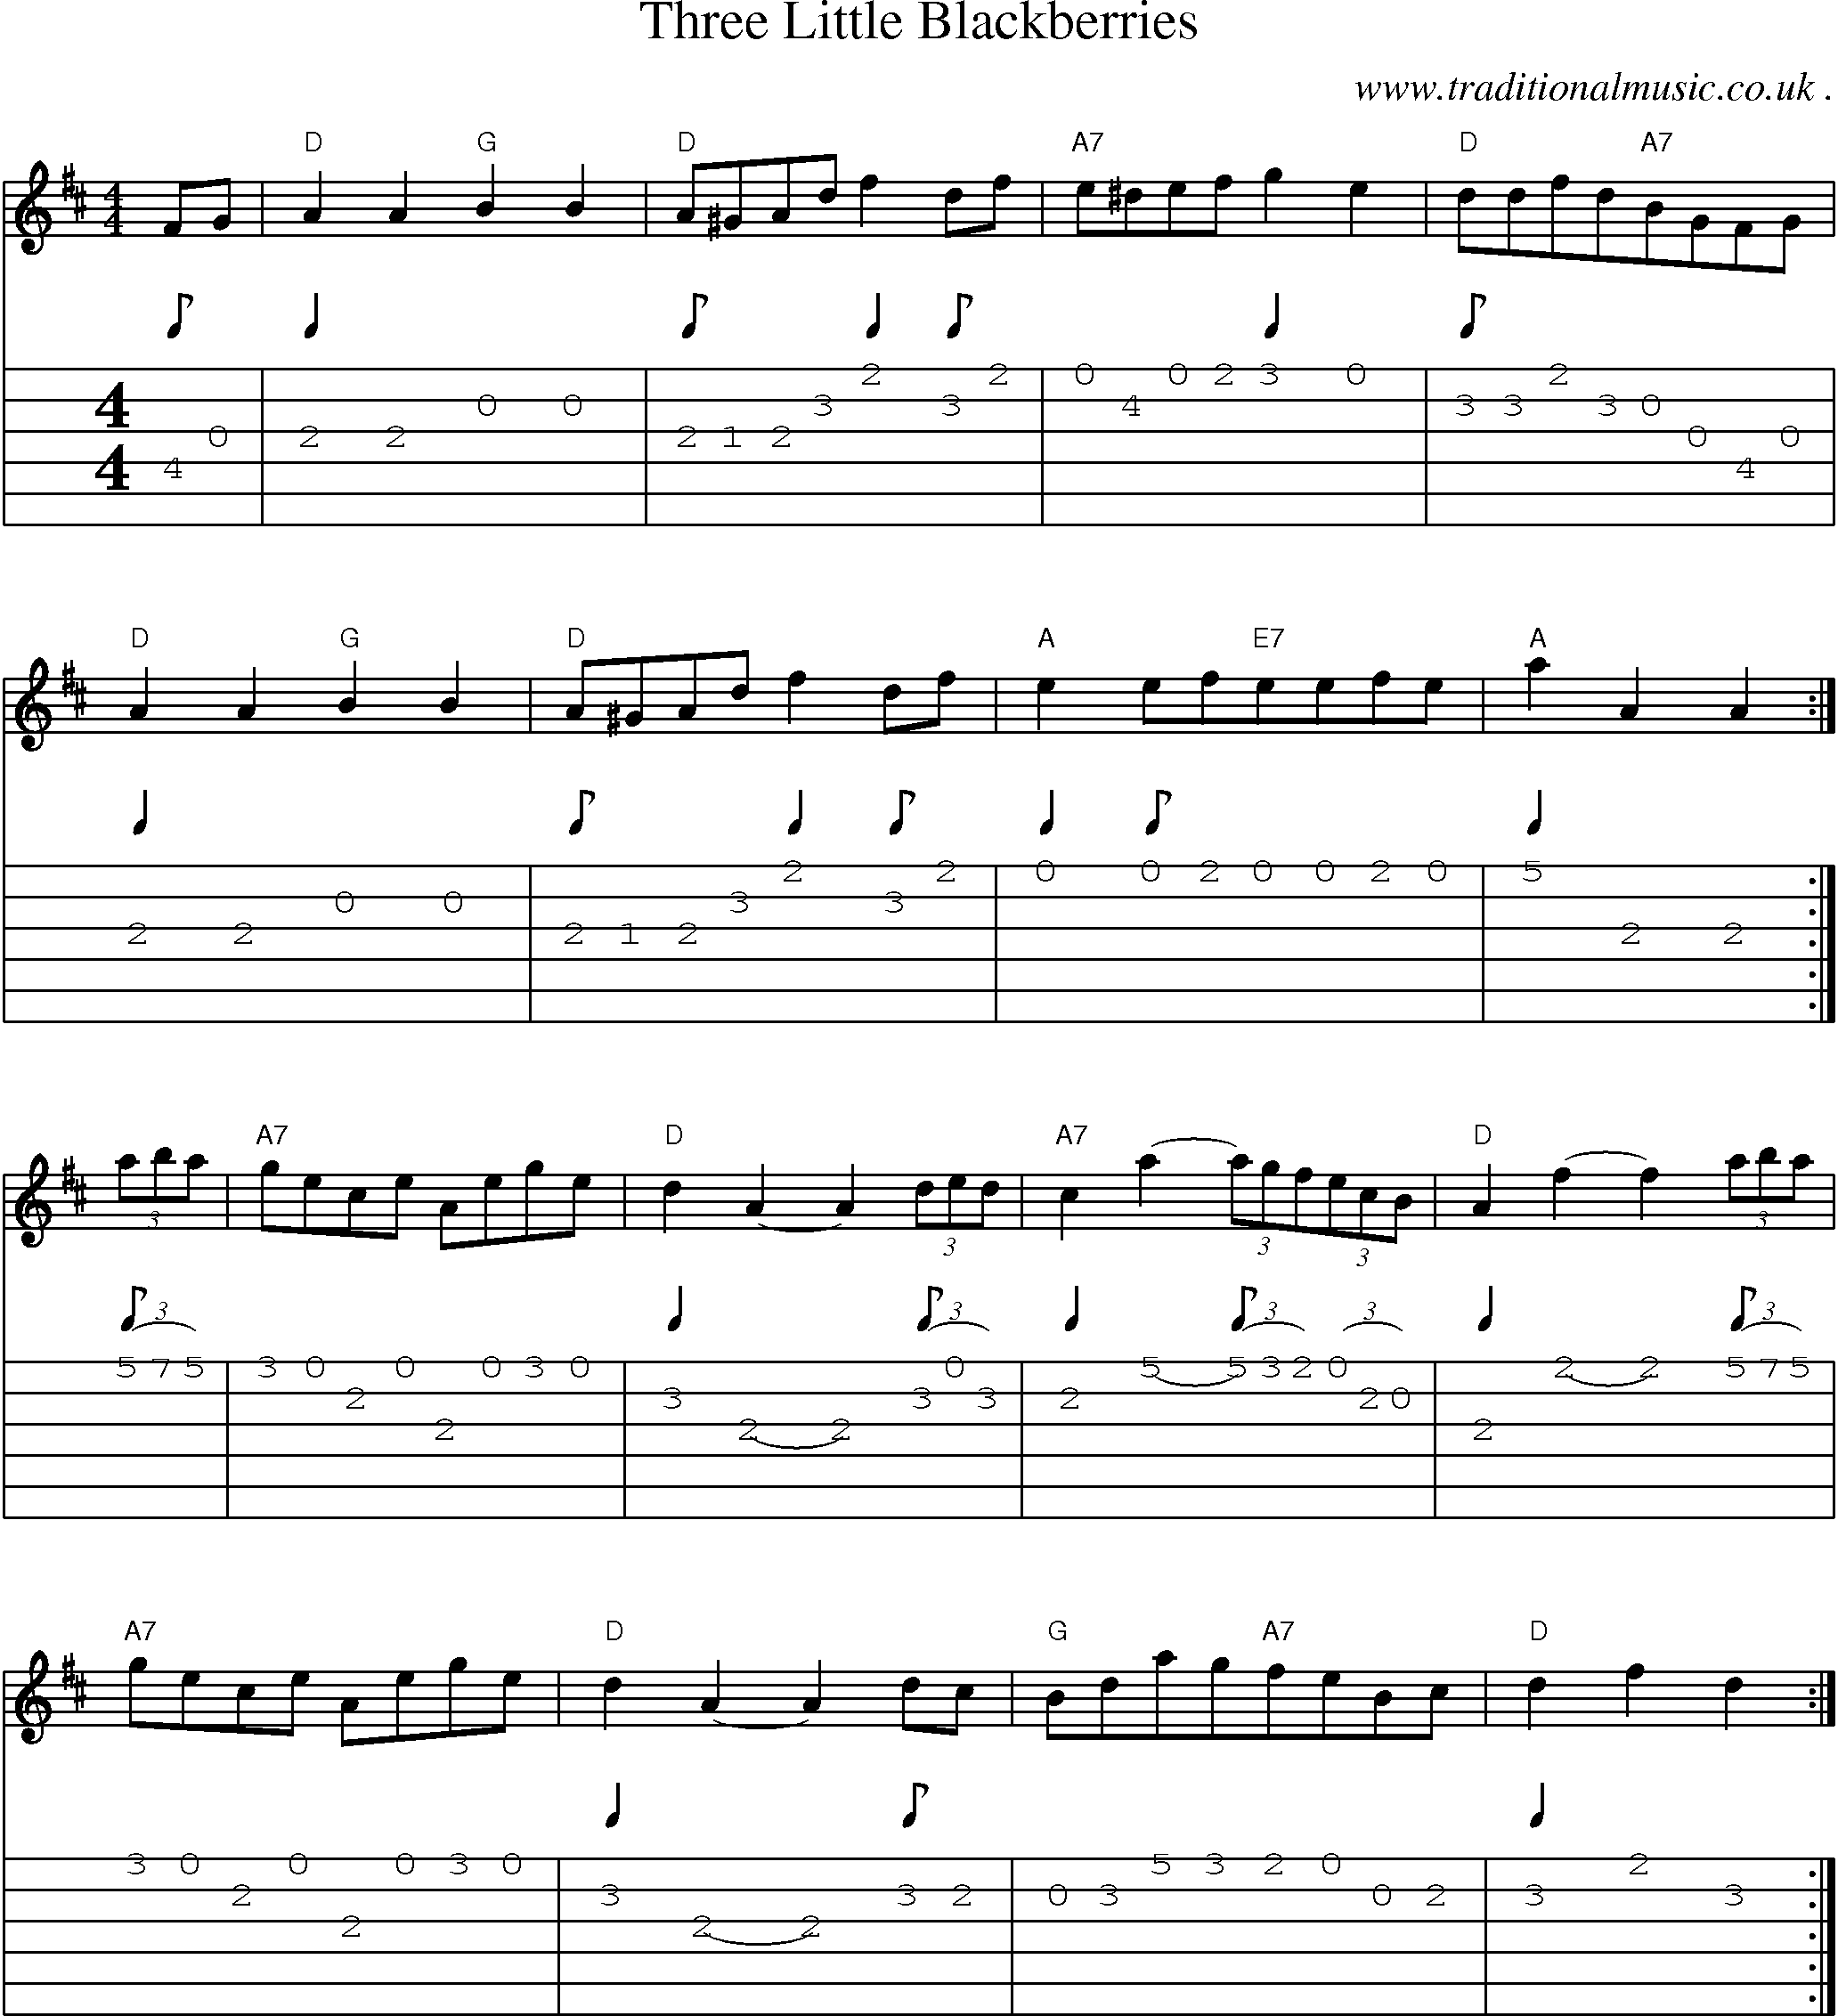 Sheet-Music and Guitar Tabs for Three Little Blackberries